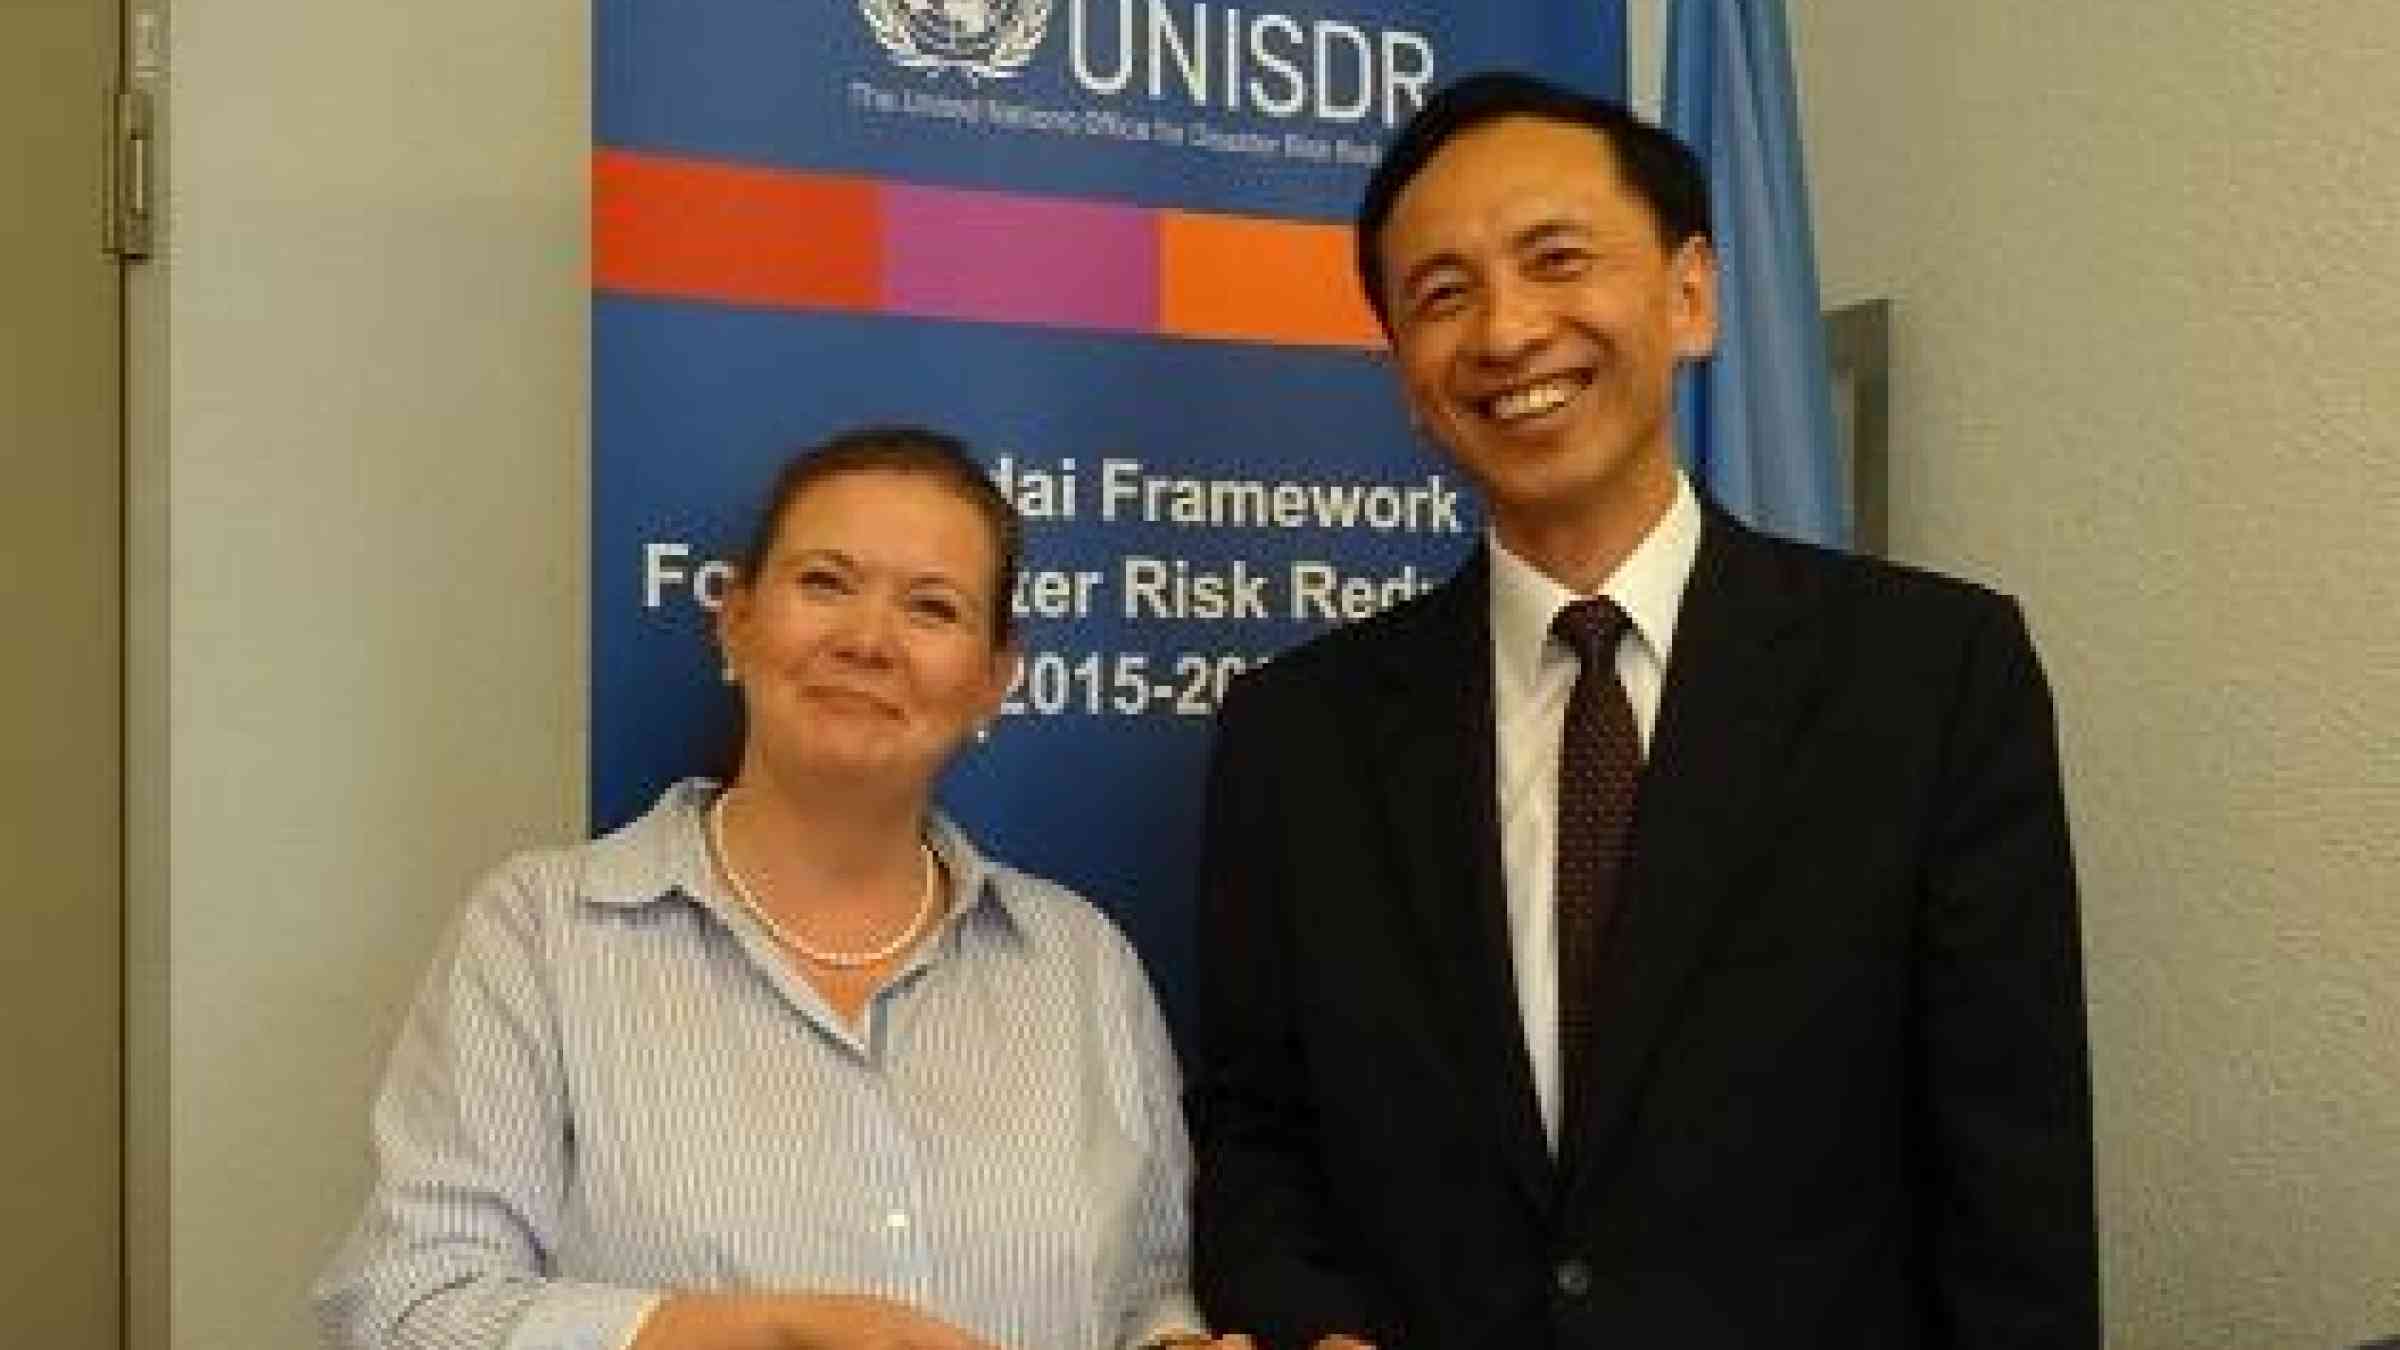 Ms. Kirsi Madi, UNISDR Director, was presented with an emergency radio set by the President of China National Radio, Mr. Yan Xiaoming. following discussions earlier today at UNISDR HQ in Geneva